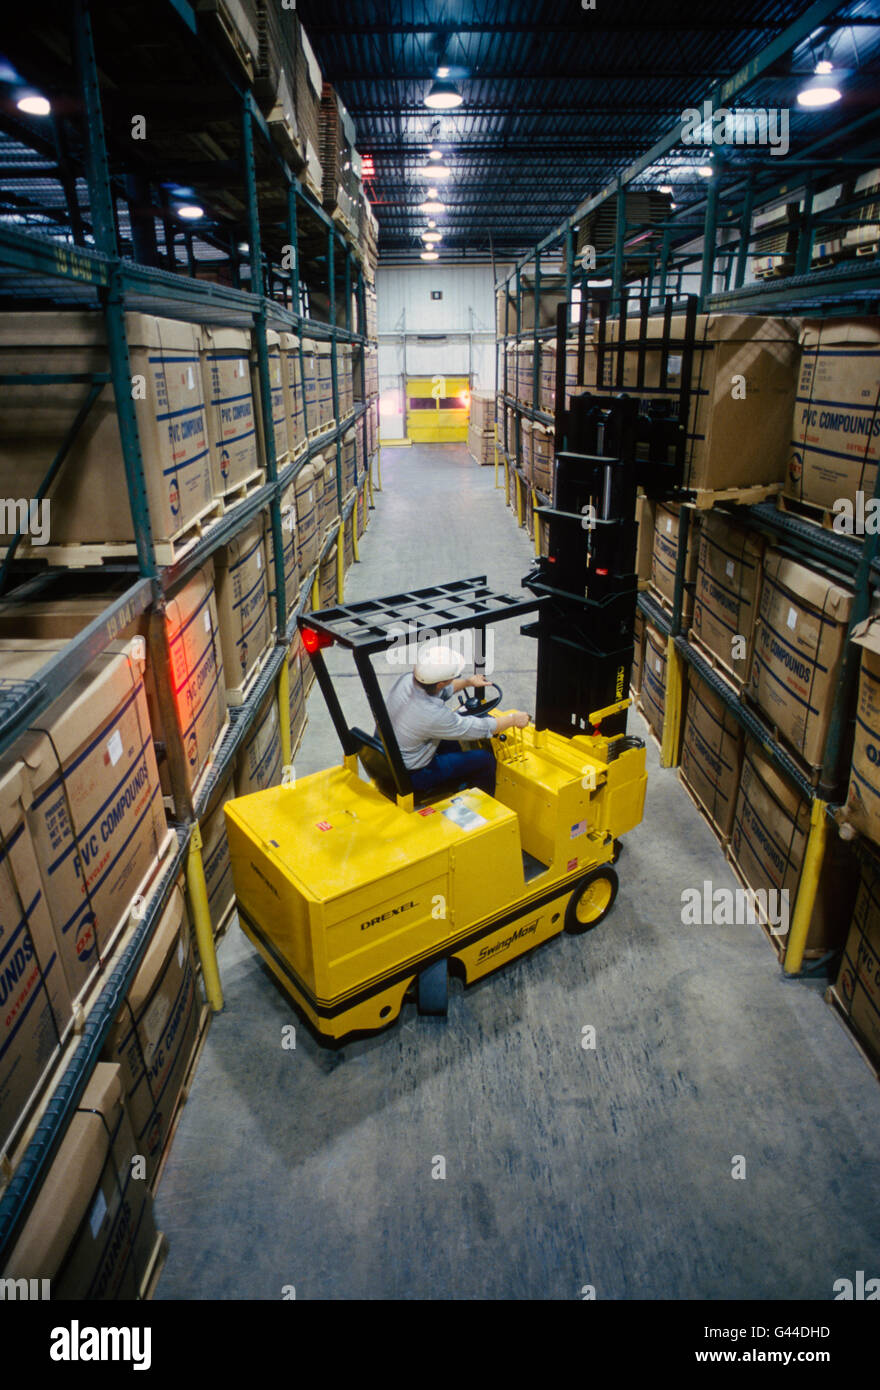 Forklift working in a large distribution warehouse Stock Photo